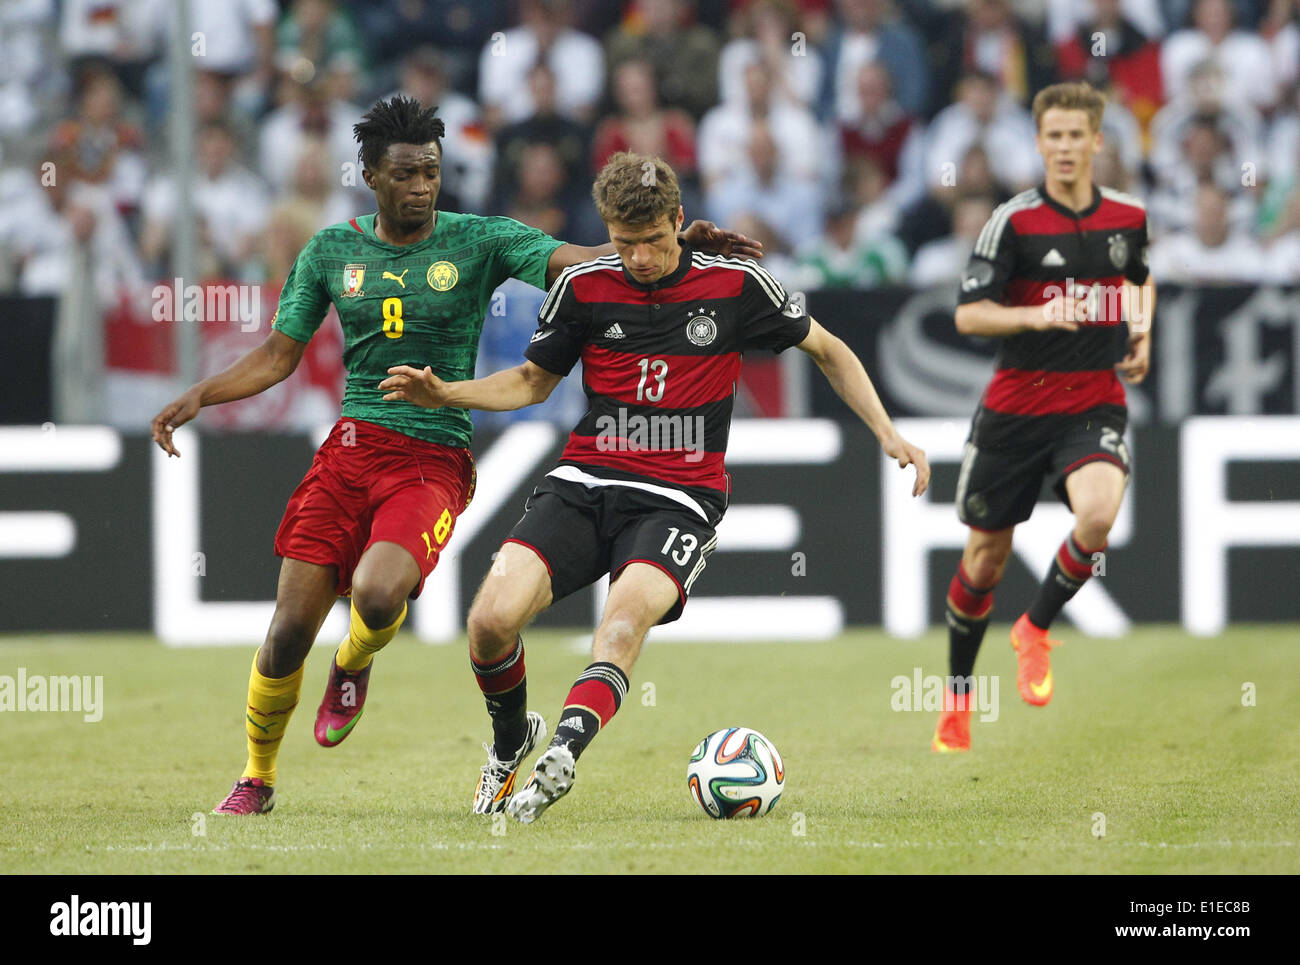 Moenchengladbach, Germany. 01st June, 2014. Germany's Thomas Mueller (C) in action against Cameroon's Benjamin Moukandjo during the friendly soccer match between Germany and Cameroon at the Borussia Park stadium in Moenchengladbach, Germany, 01 June 2014. Photo: Roland Weihrauch/dpa/Alamy Live News Stock Photo